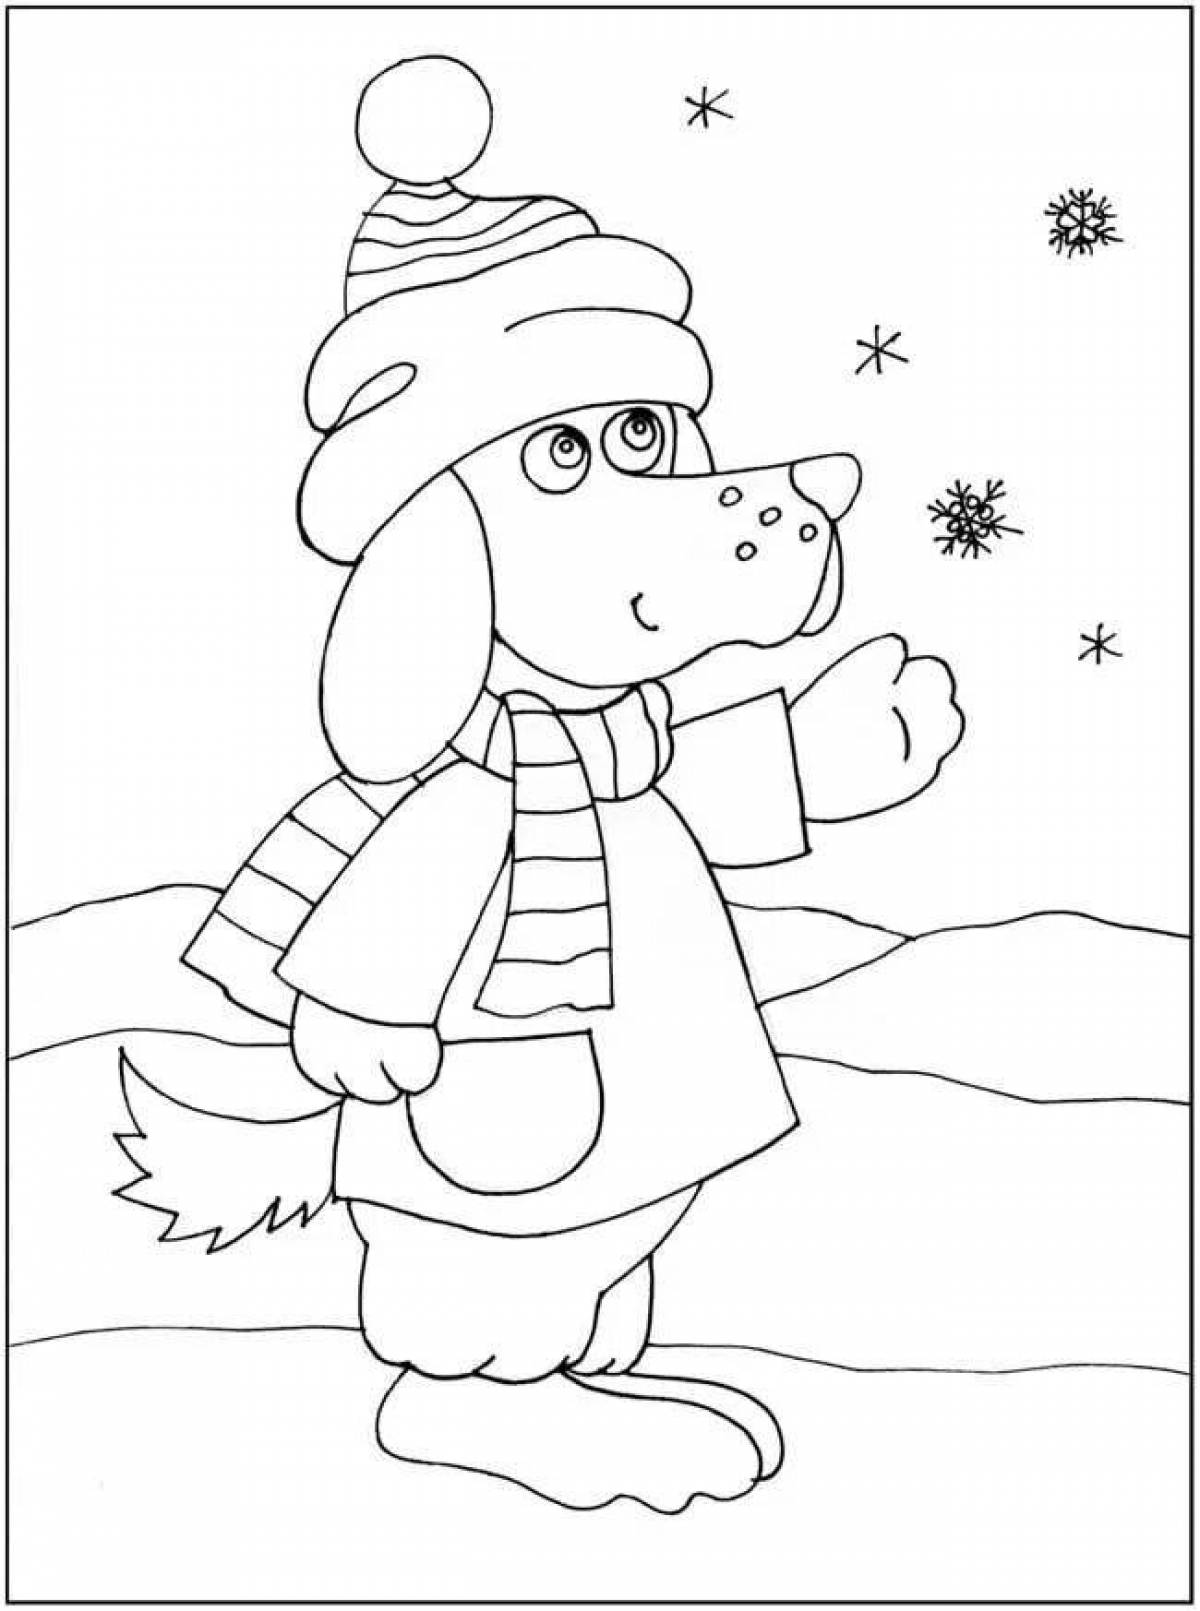 Gorgeous dog Christmas coloring book